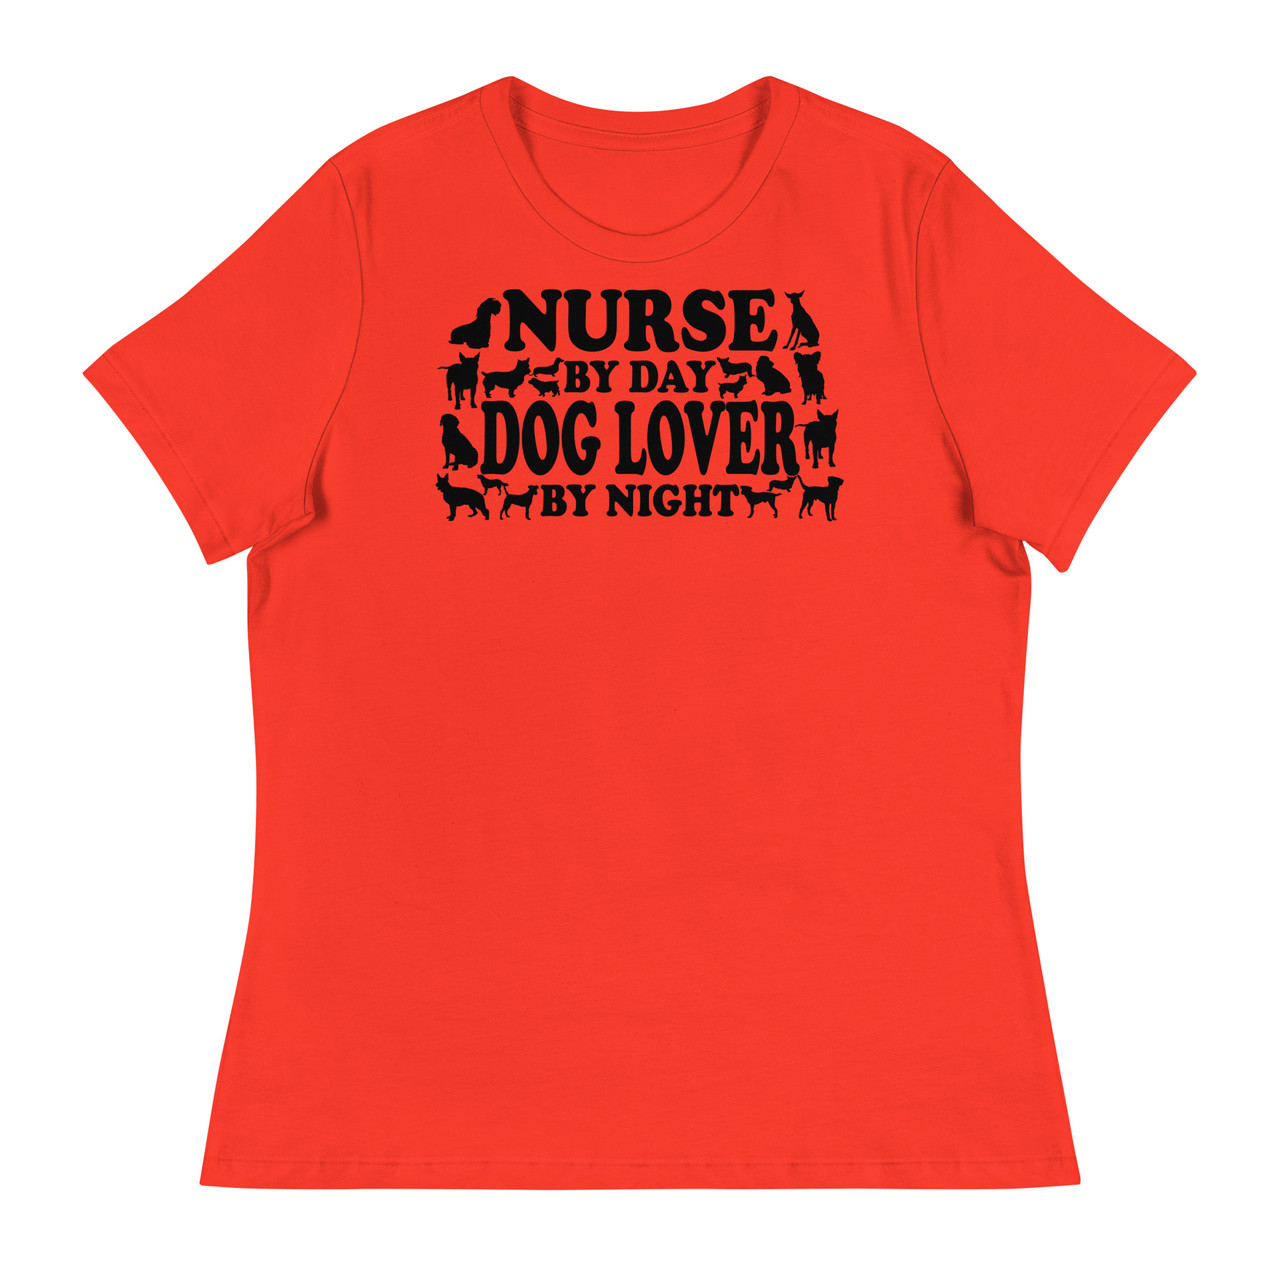 Nurse By Day Women's Relaxed T-Shirt - Bella + Canvas 6400 